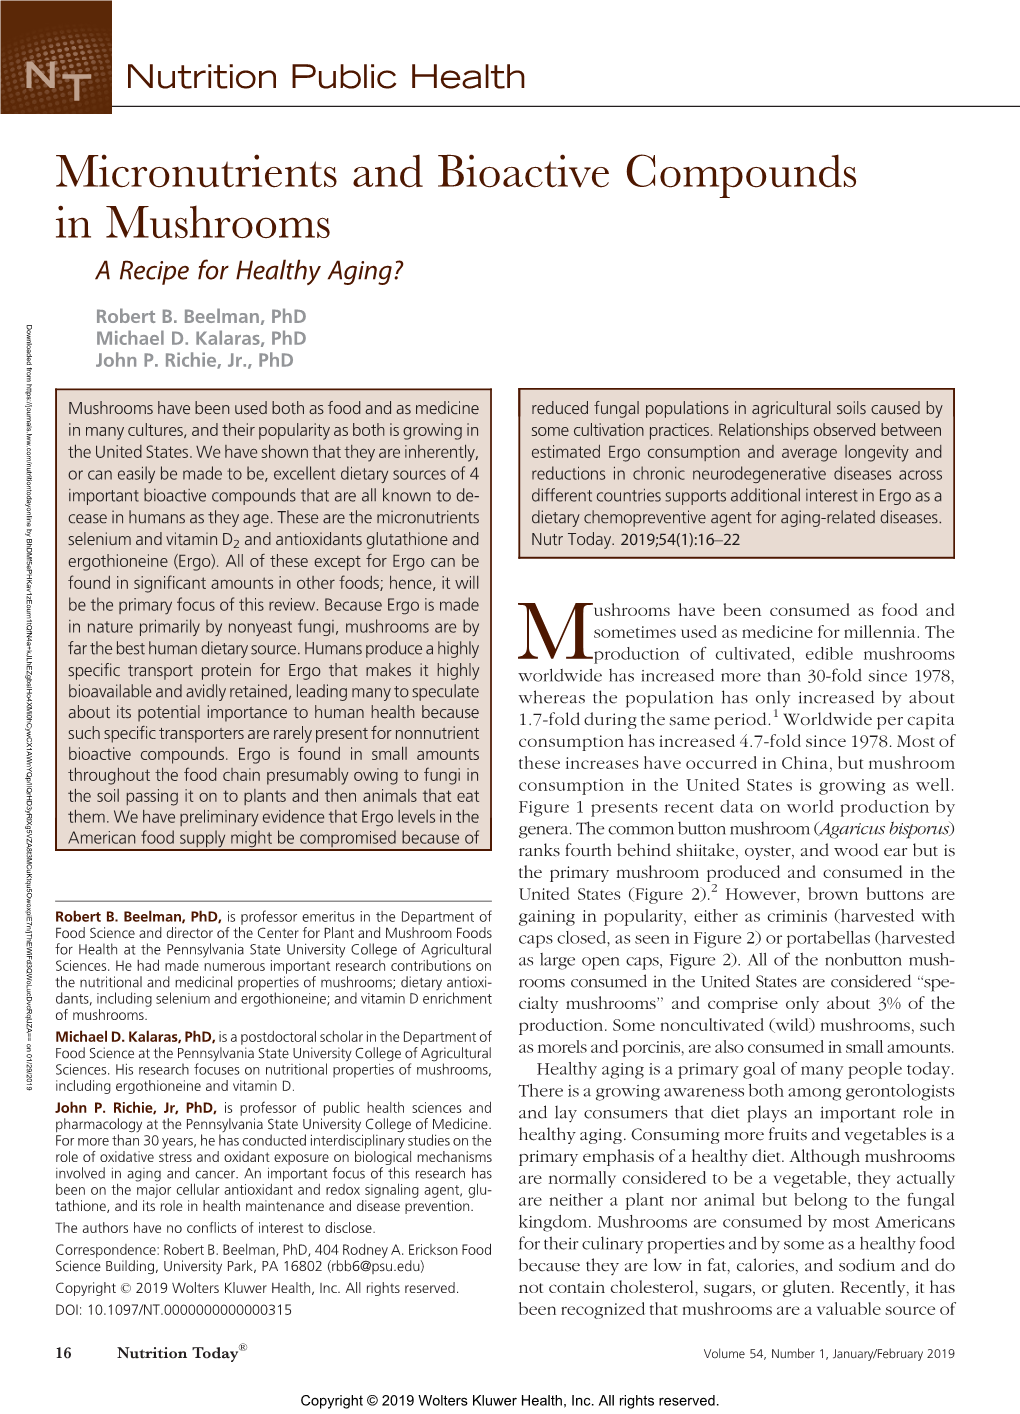 Micronutrients and Bioactive Compounds in Mushrooms